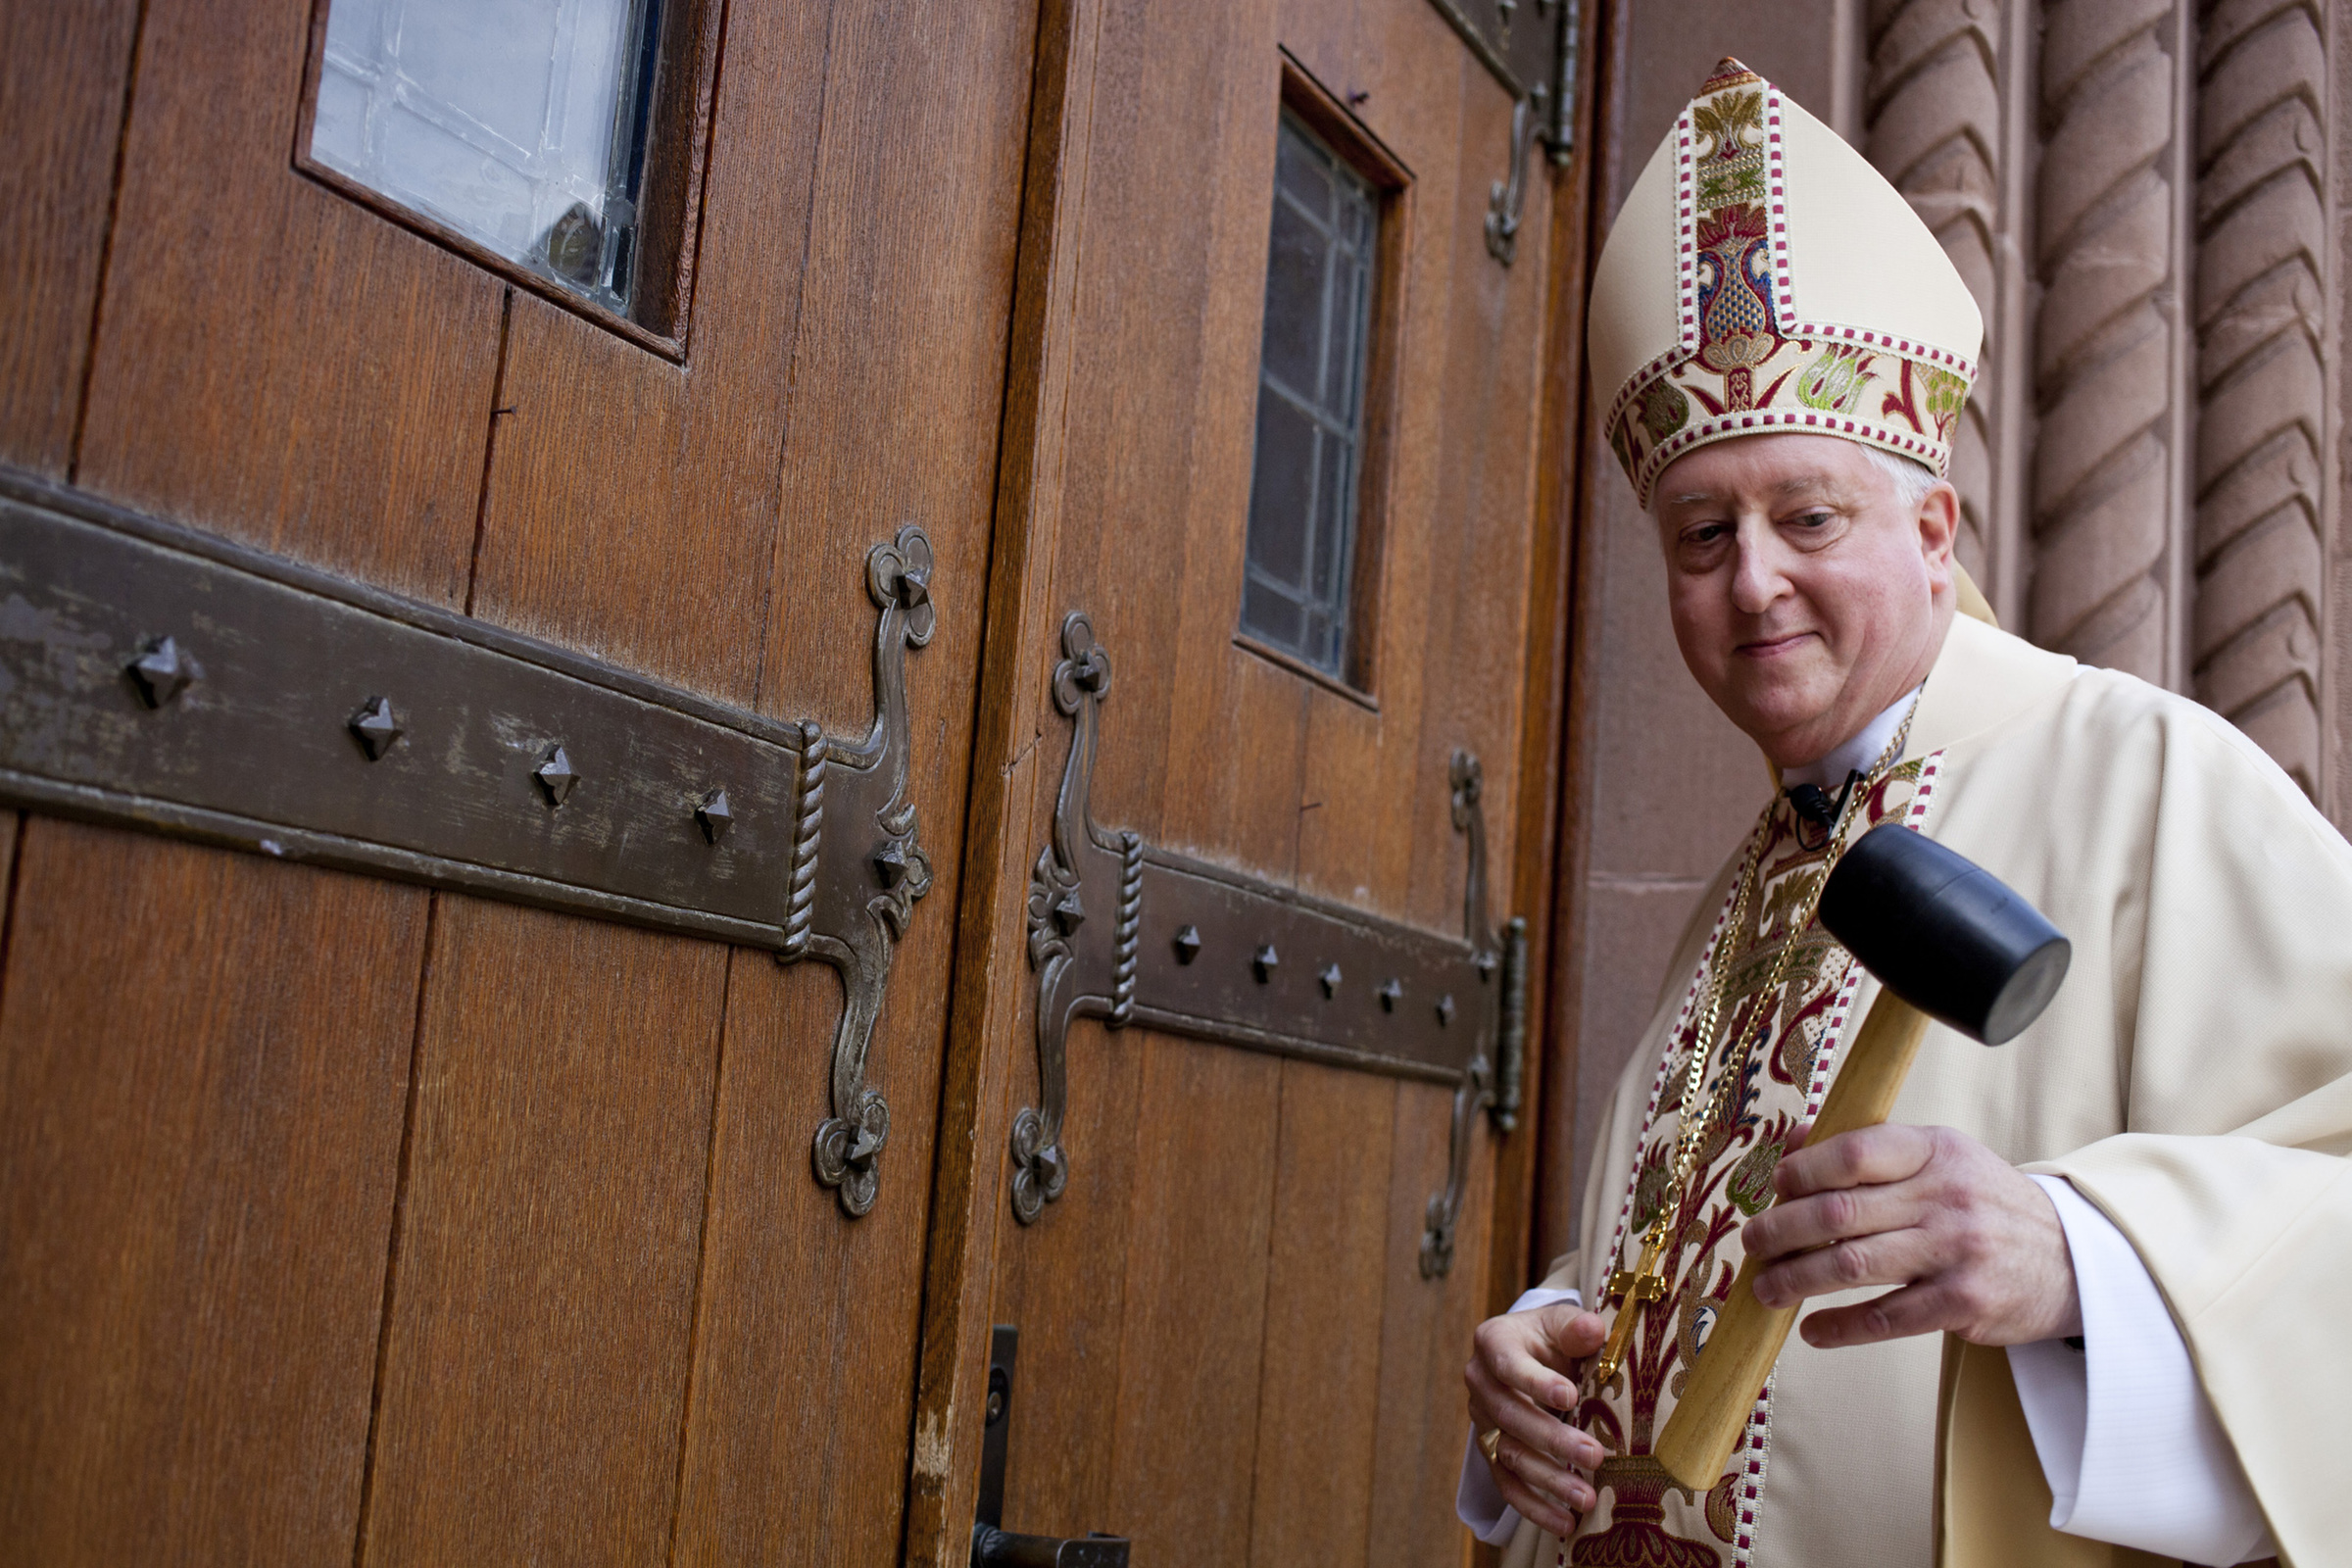 Bishop Mitchell Rozanski uses a mallet to knock three times on the doors of St. Michael's Cathedral in Springfield, Massachusetts, Aug. 12, 2014, before his installation as bishop of the diocese. (CNS/Catholic Review/Tom McCarthy Jr.)